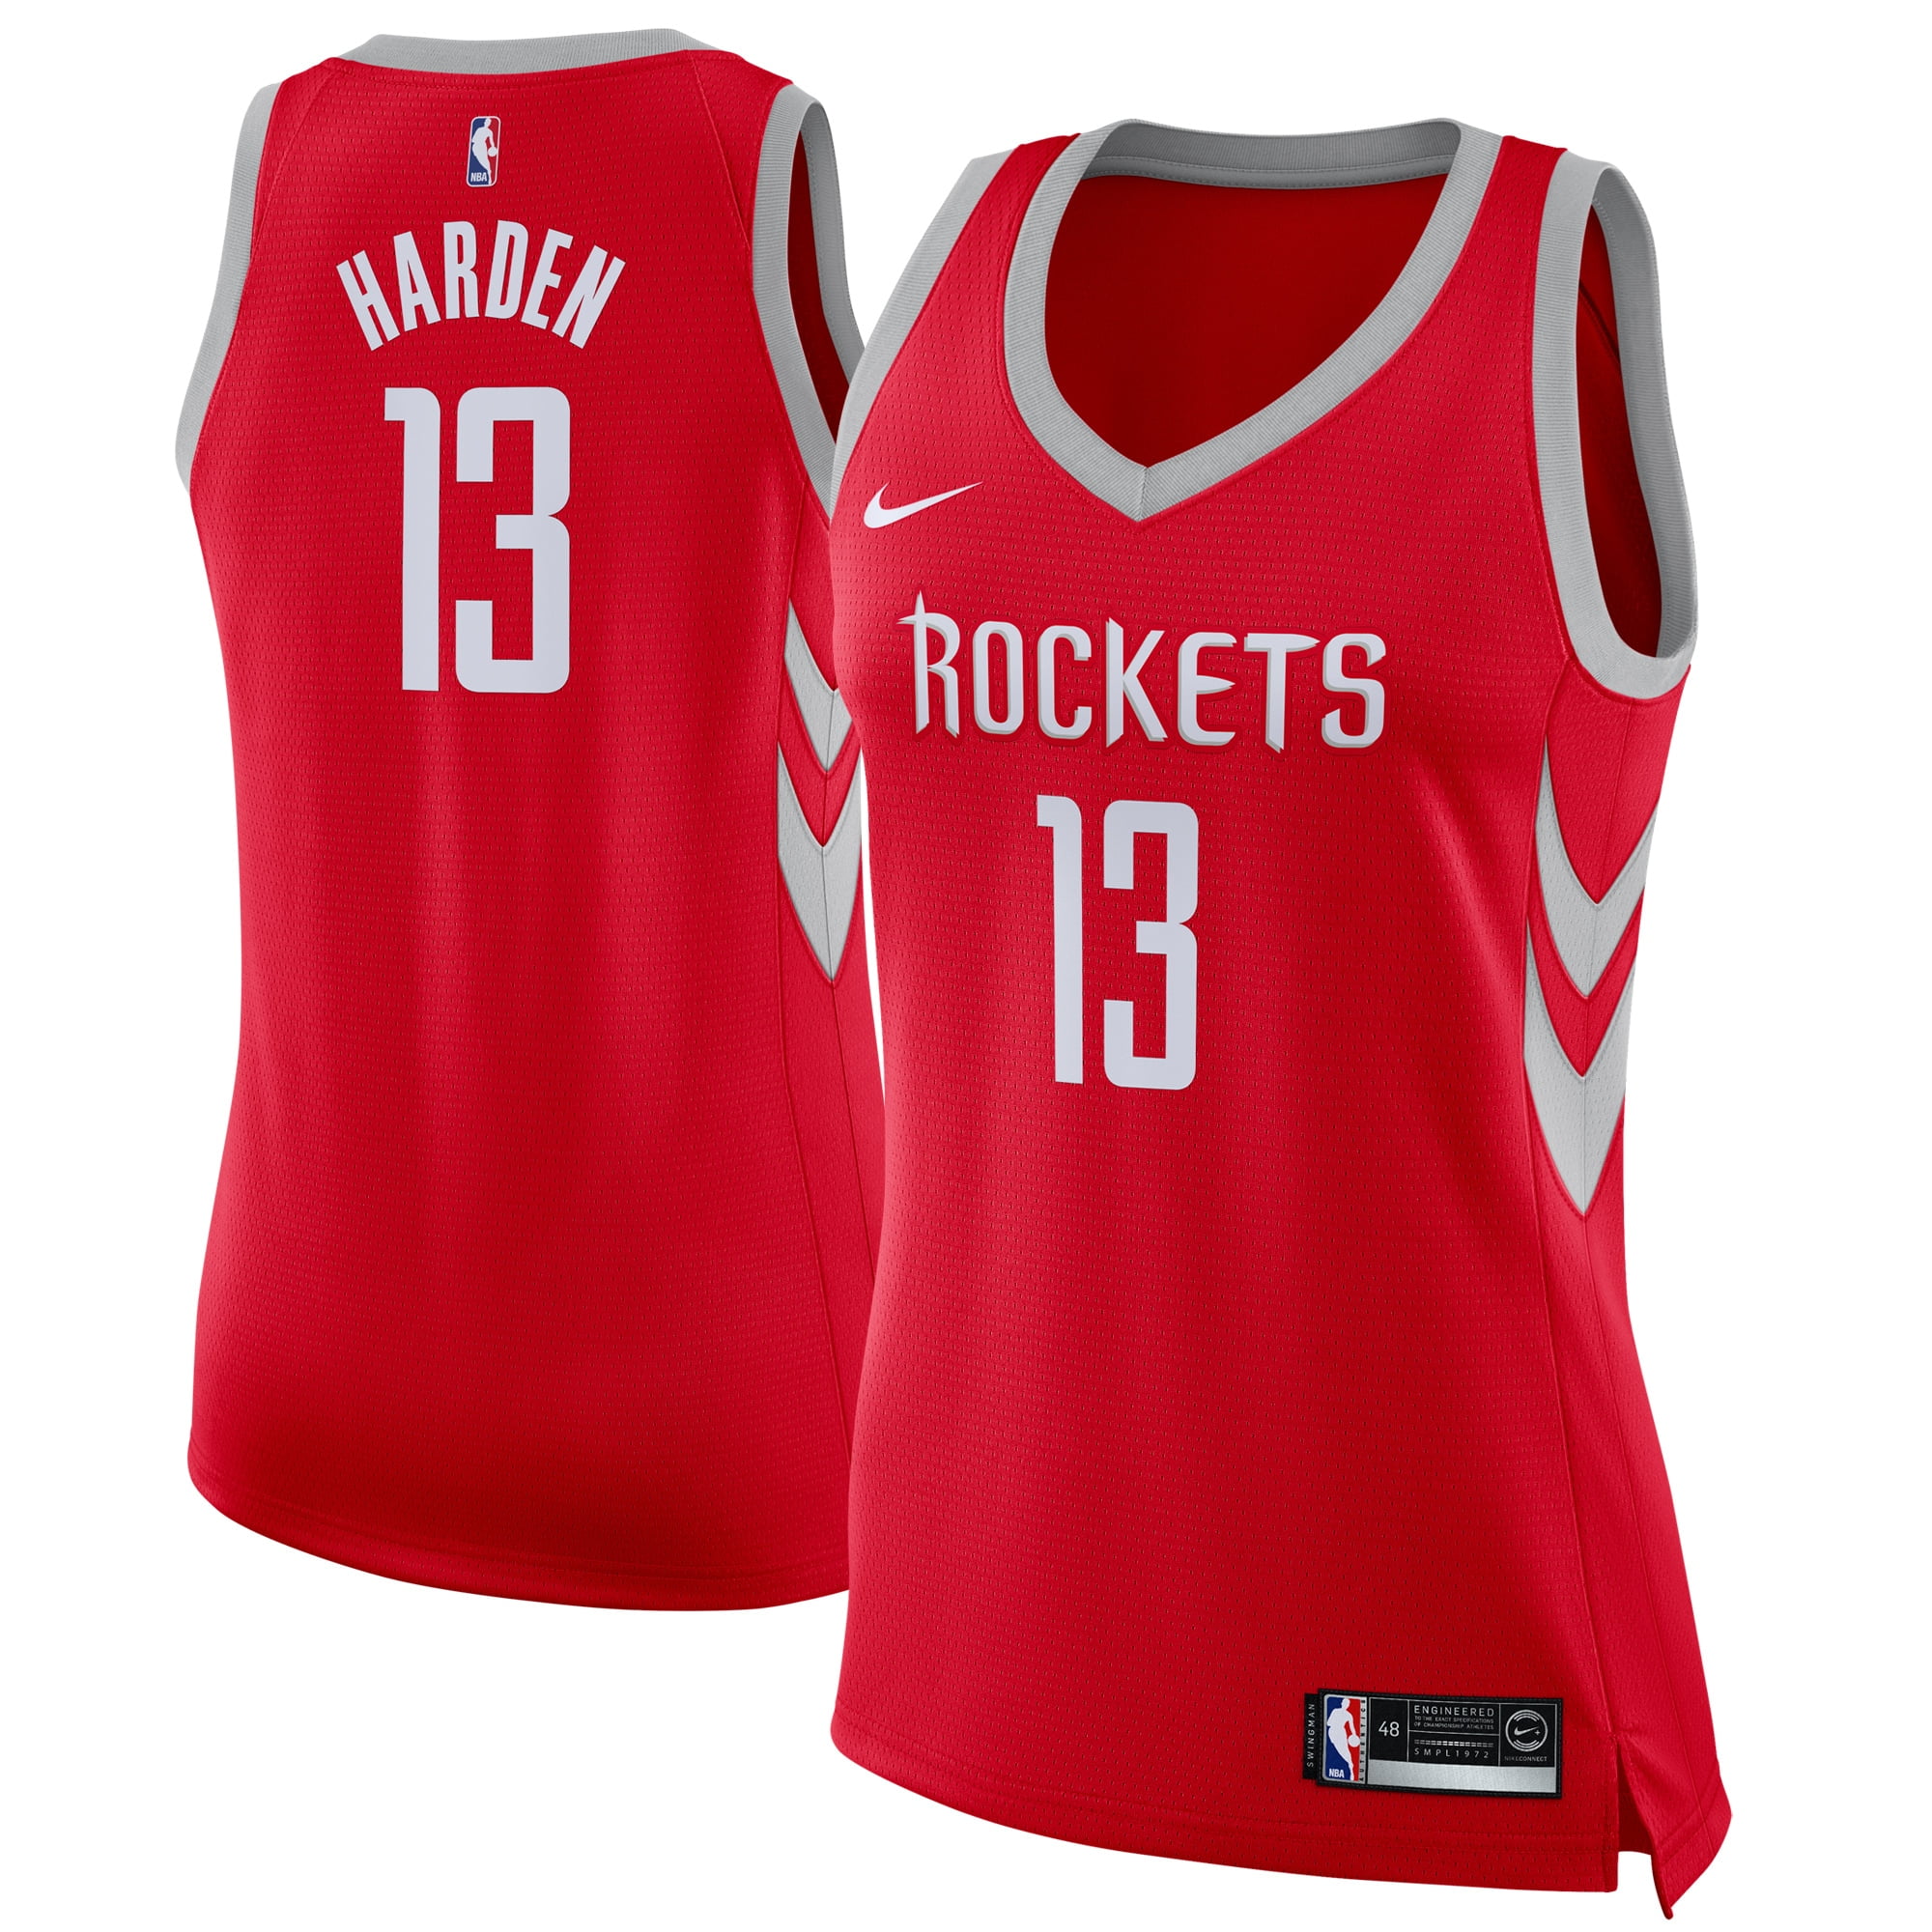 harden jersey red